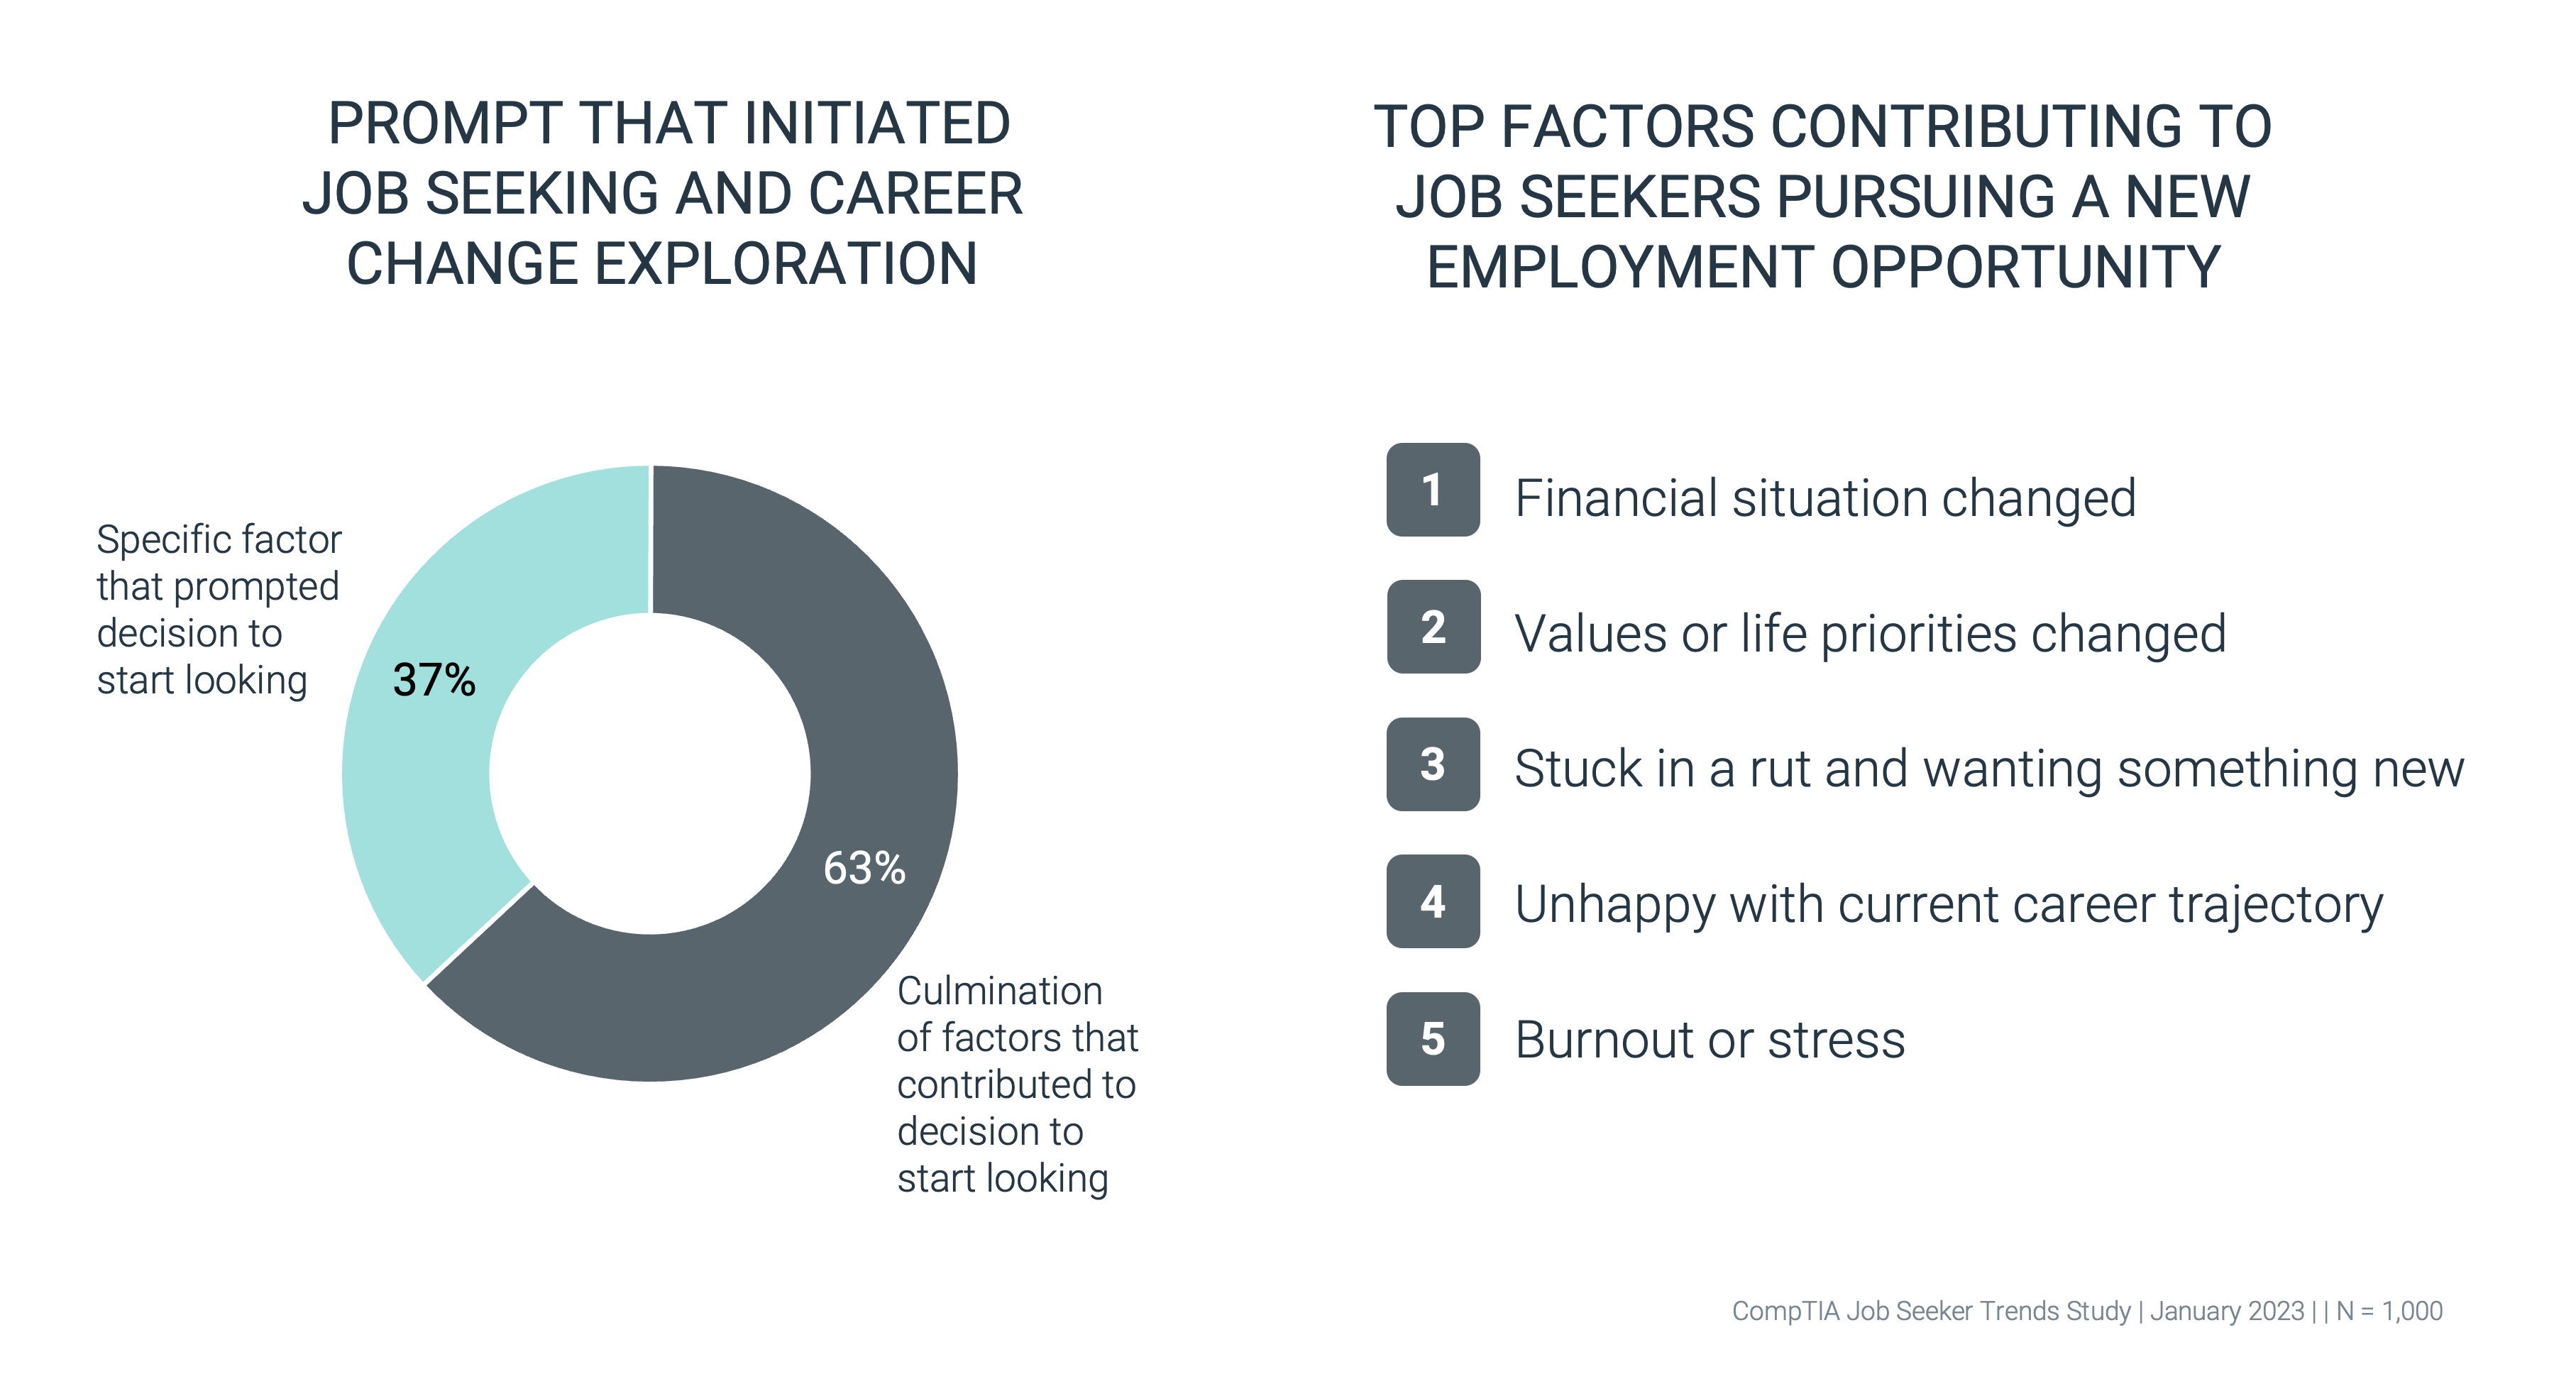 Top Factors Contributing to Job Seekers Pursuing a New Employment Opportunity